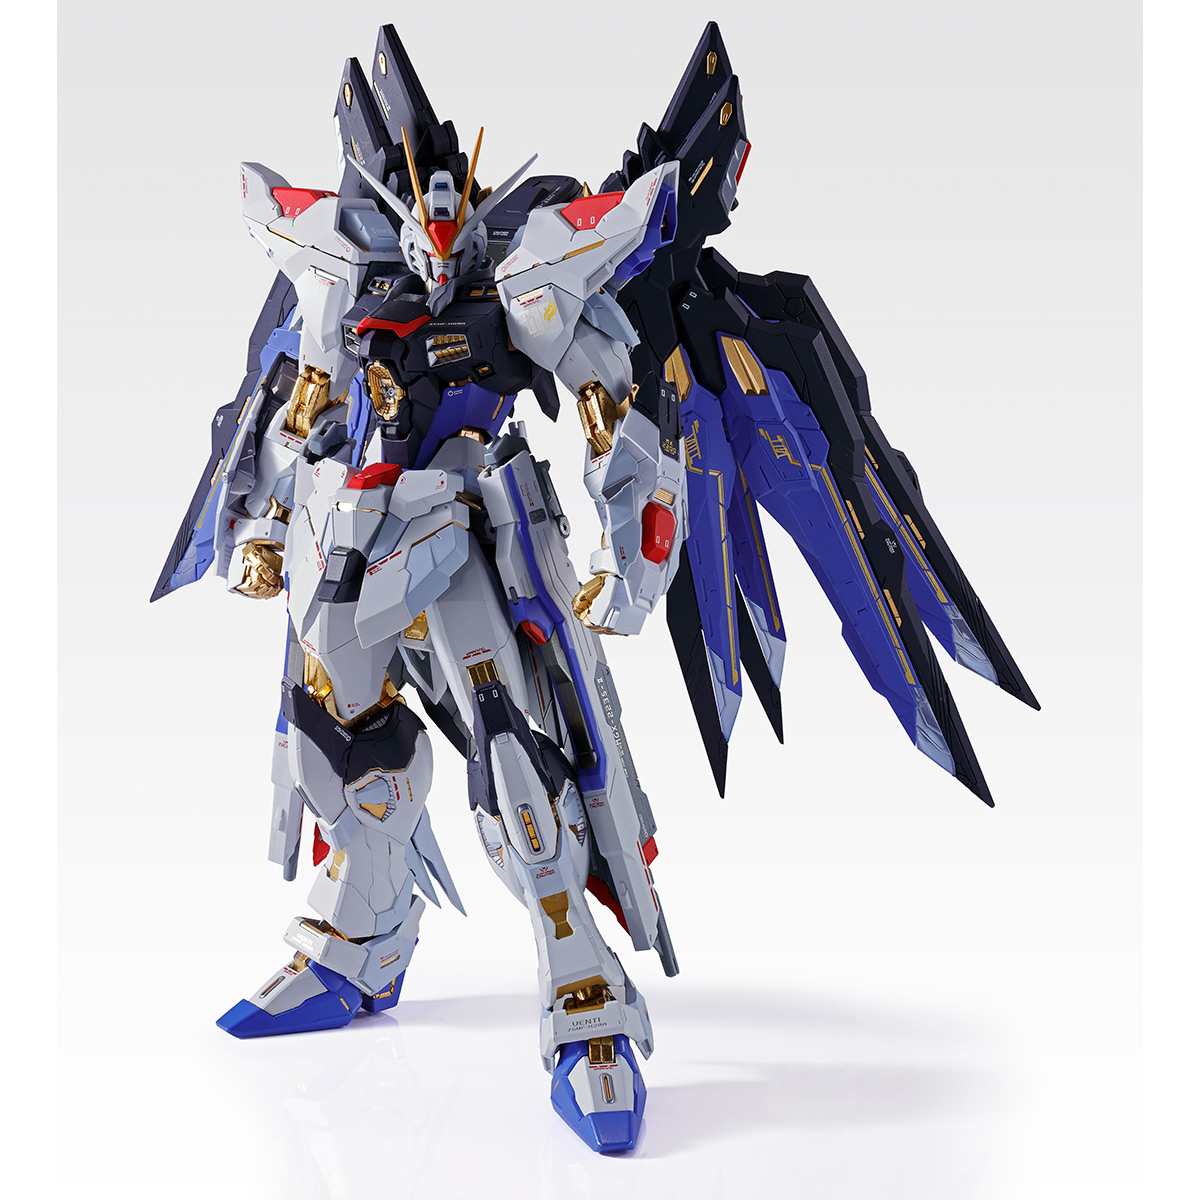 Metal Build Strike Freedom Gundam Soul Blue Ver Second Offer Gundam Premium Bandai Singapore Online Store For Action Figures Model Kits Toys And More